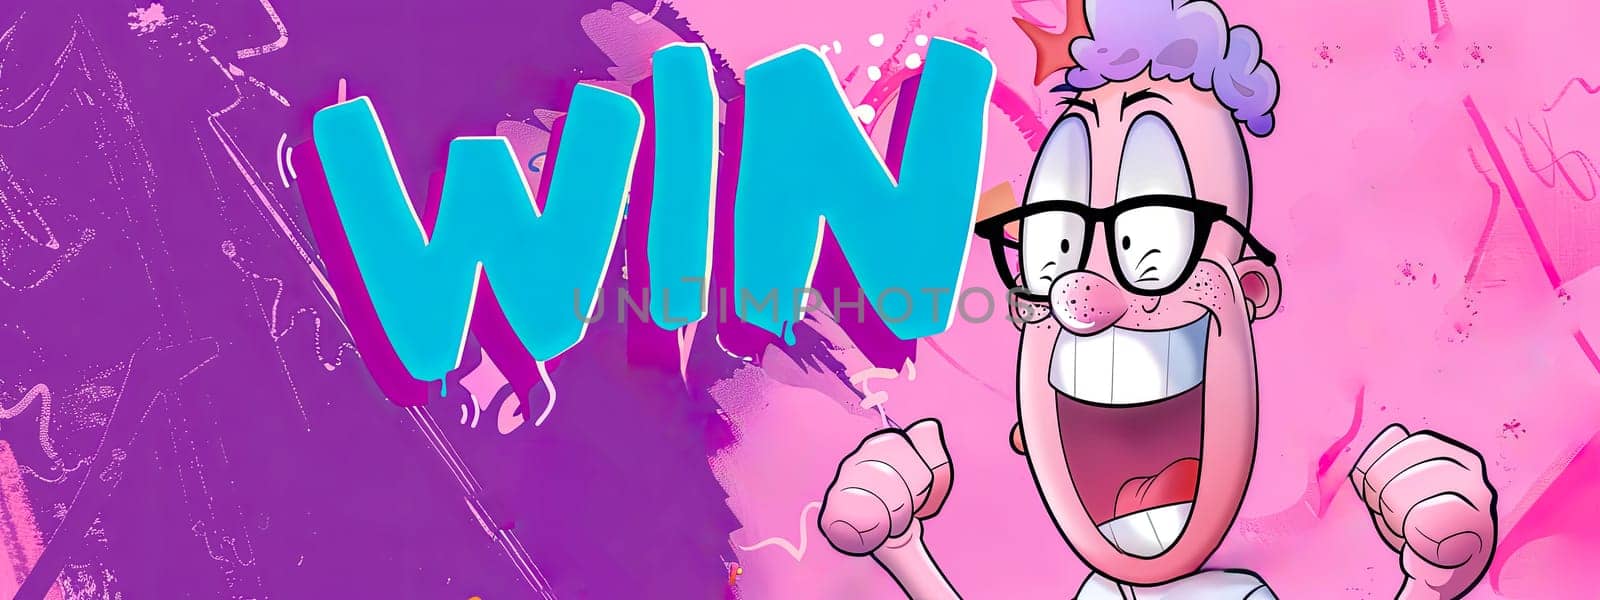 Animated male character joyously celebrates a win on a vibrant pink background